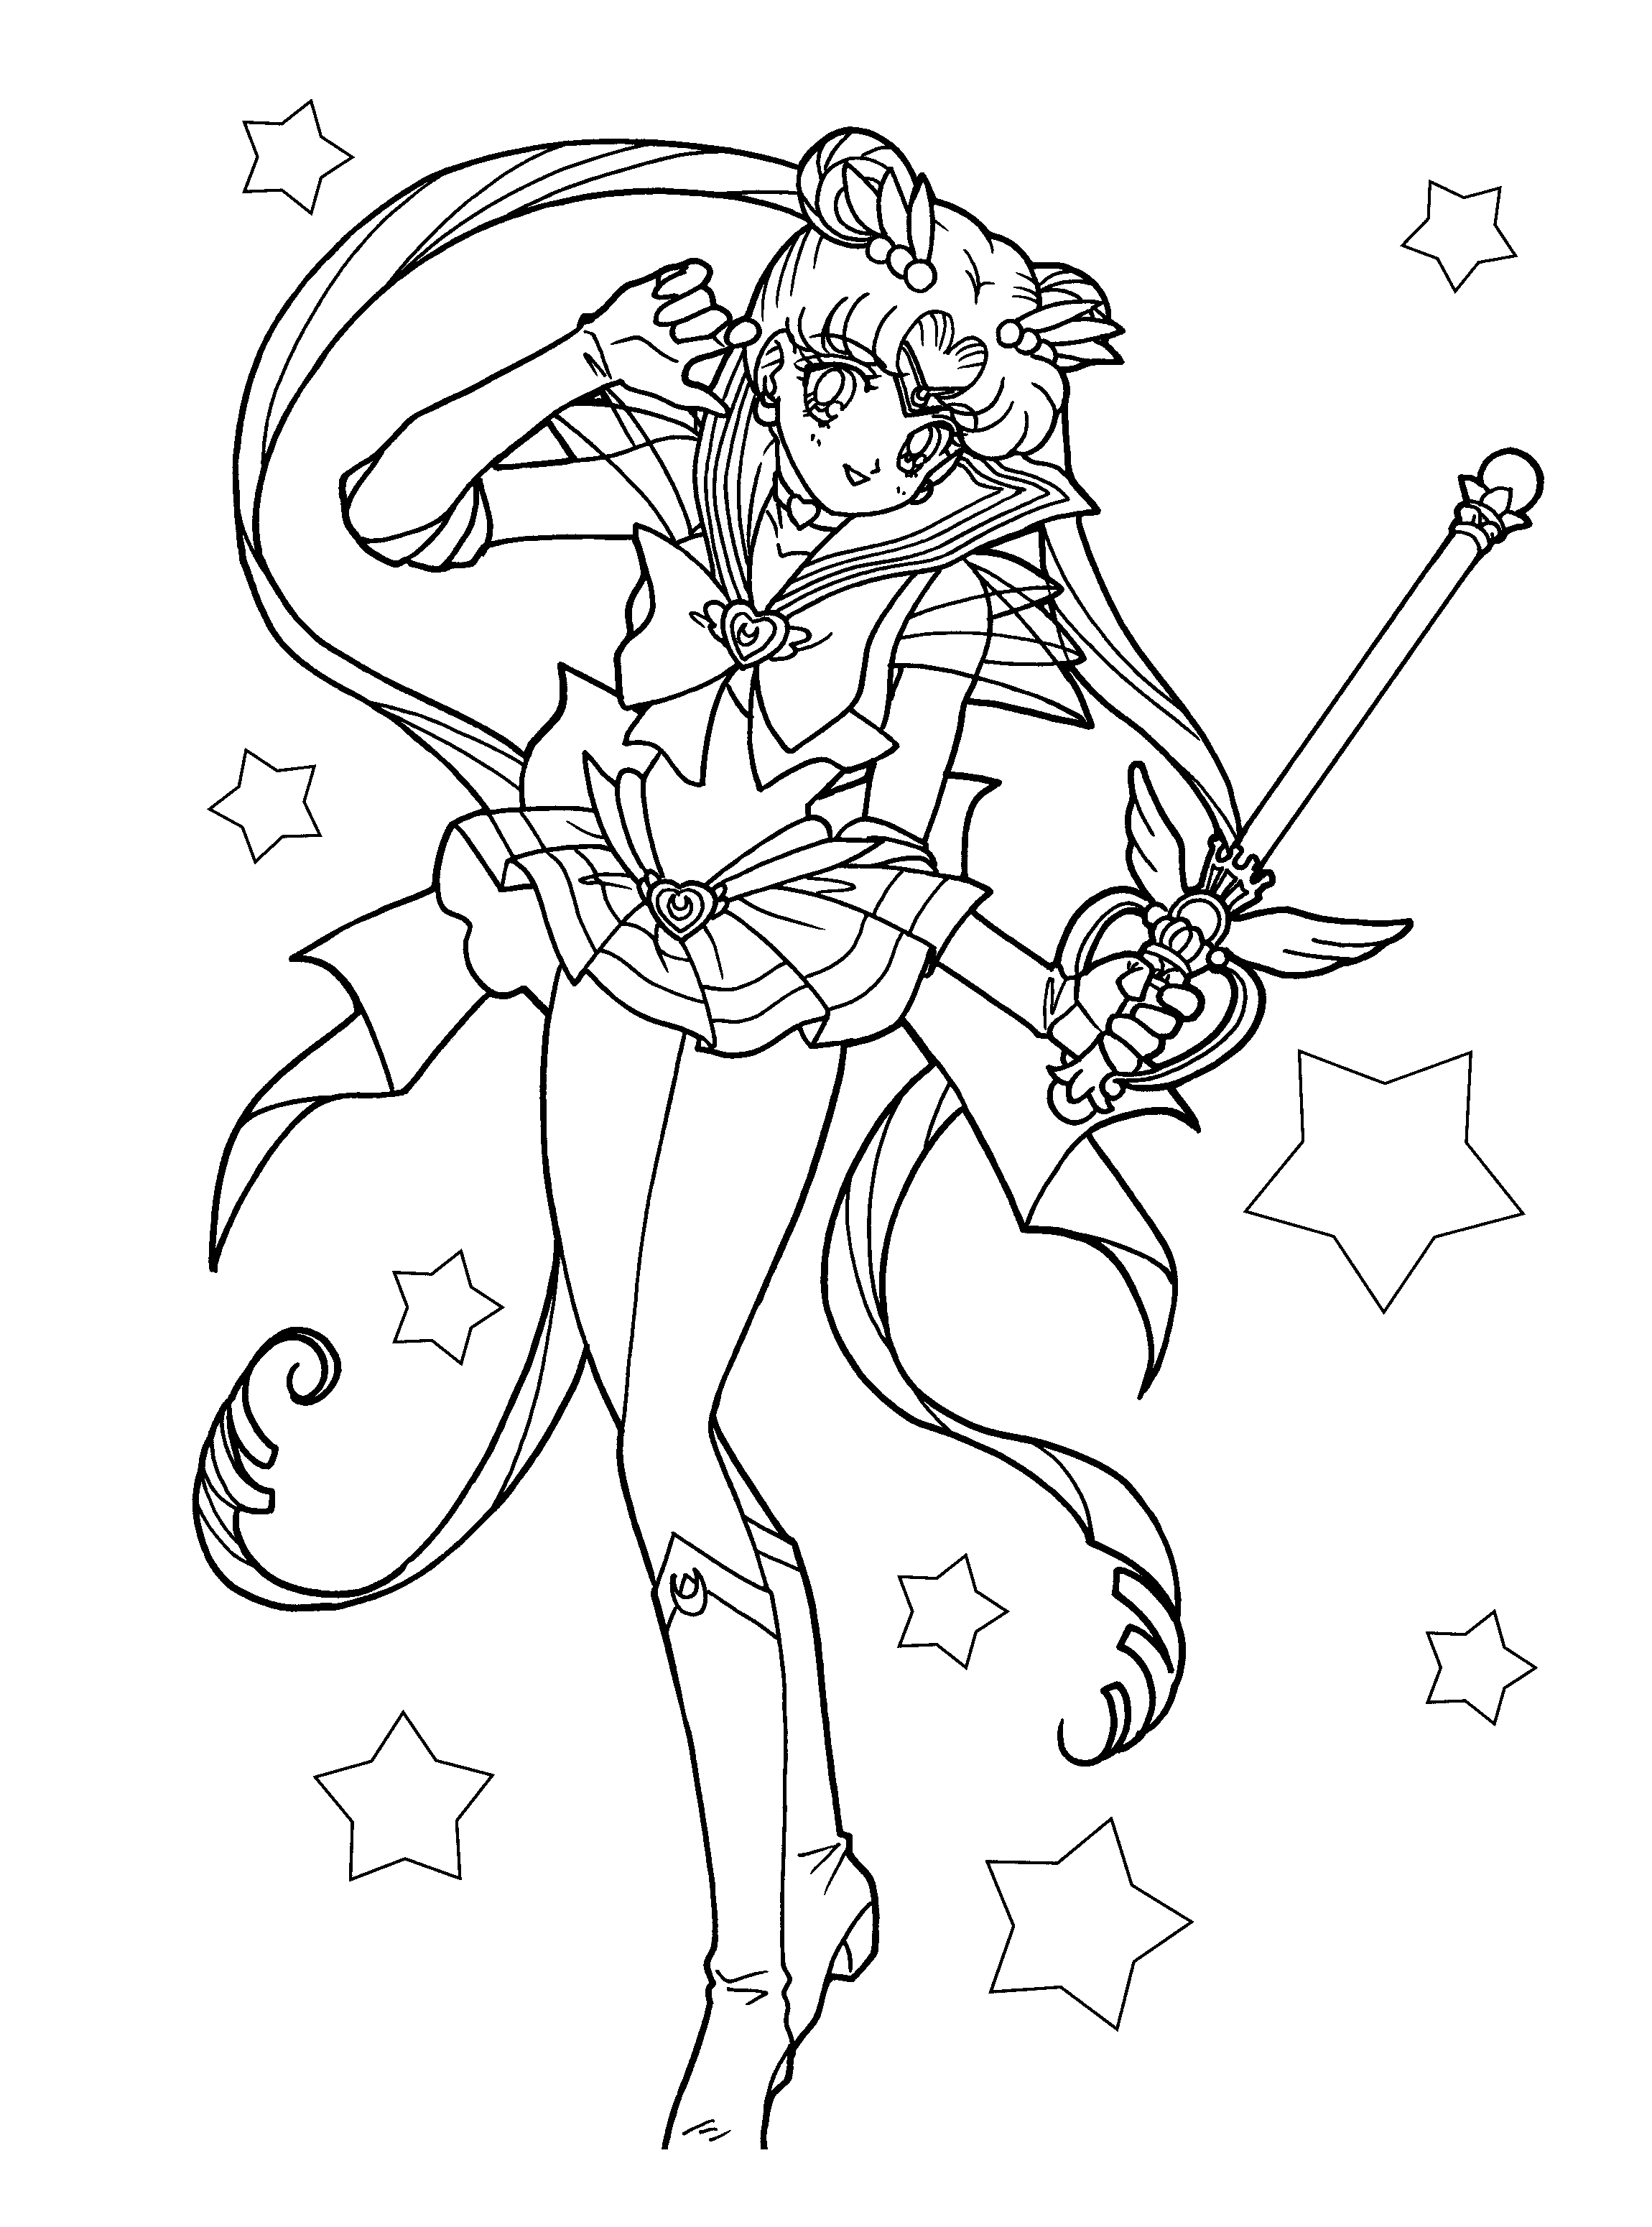 Sailor Moon Luna Coloring Pages - Coloring Home